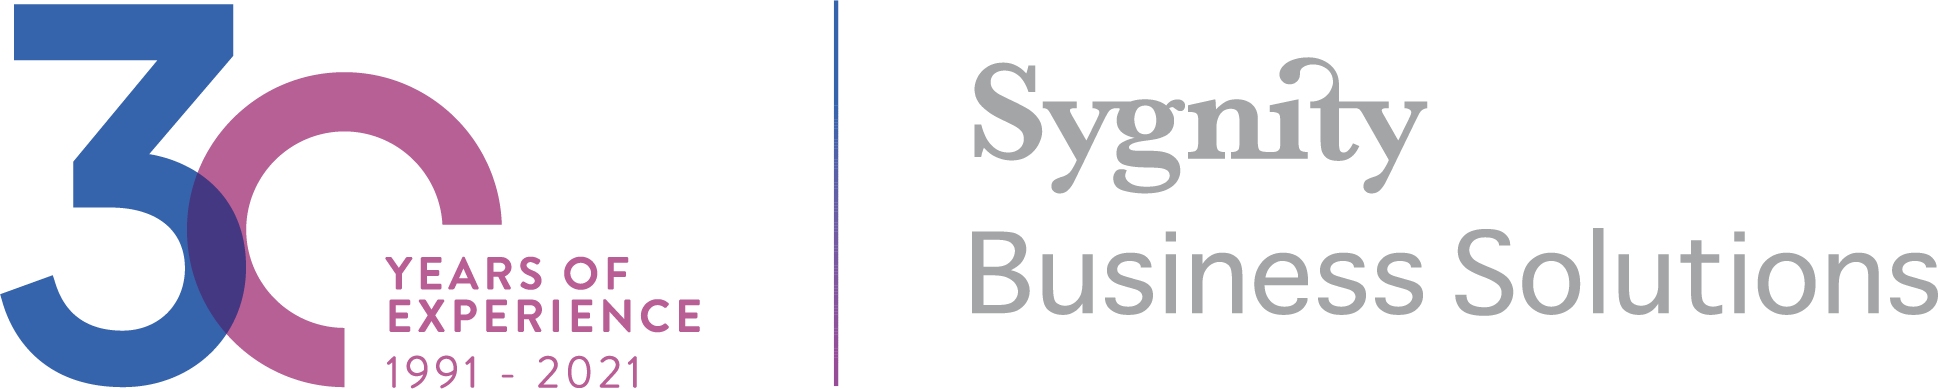 SYGNITY BUSINESS SOLUTIONS S.A.